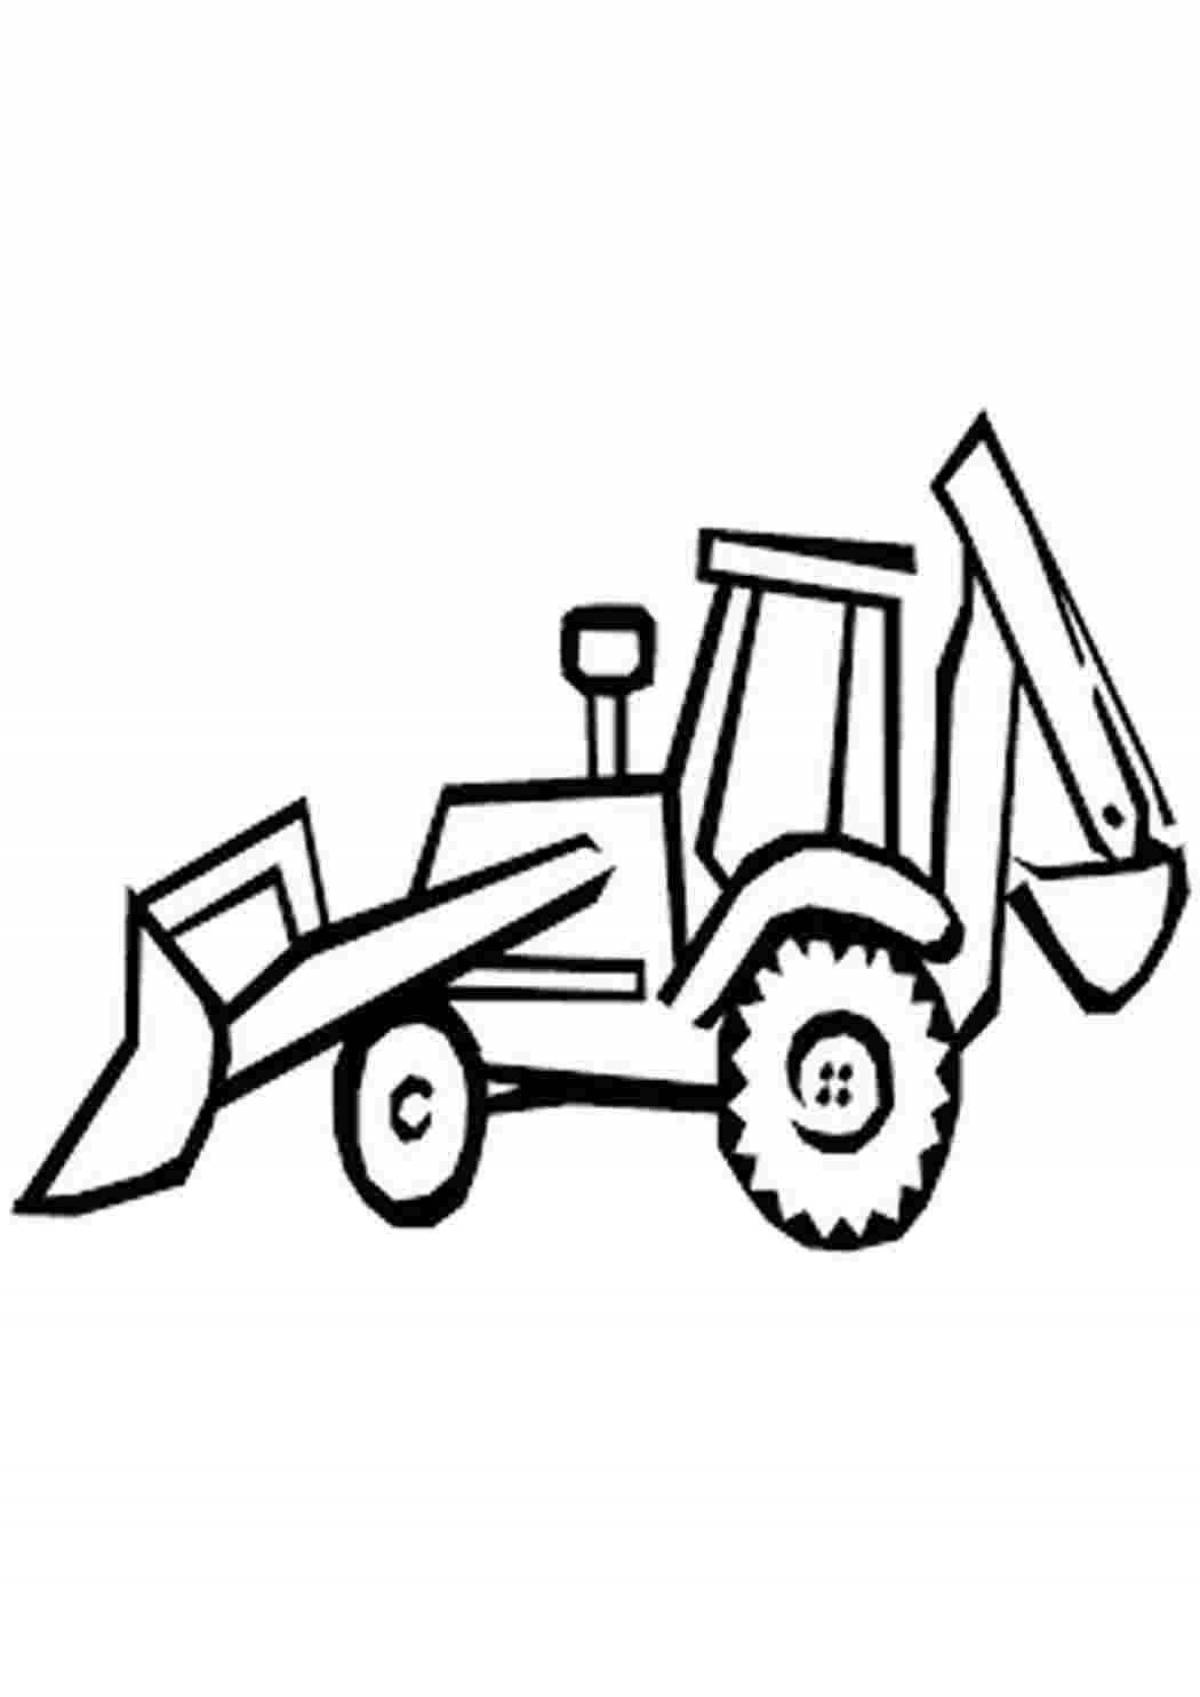 Intriguing tractor excavator coloring page